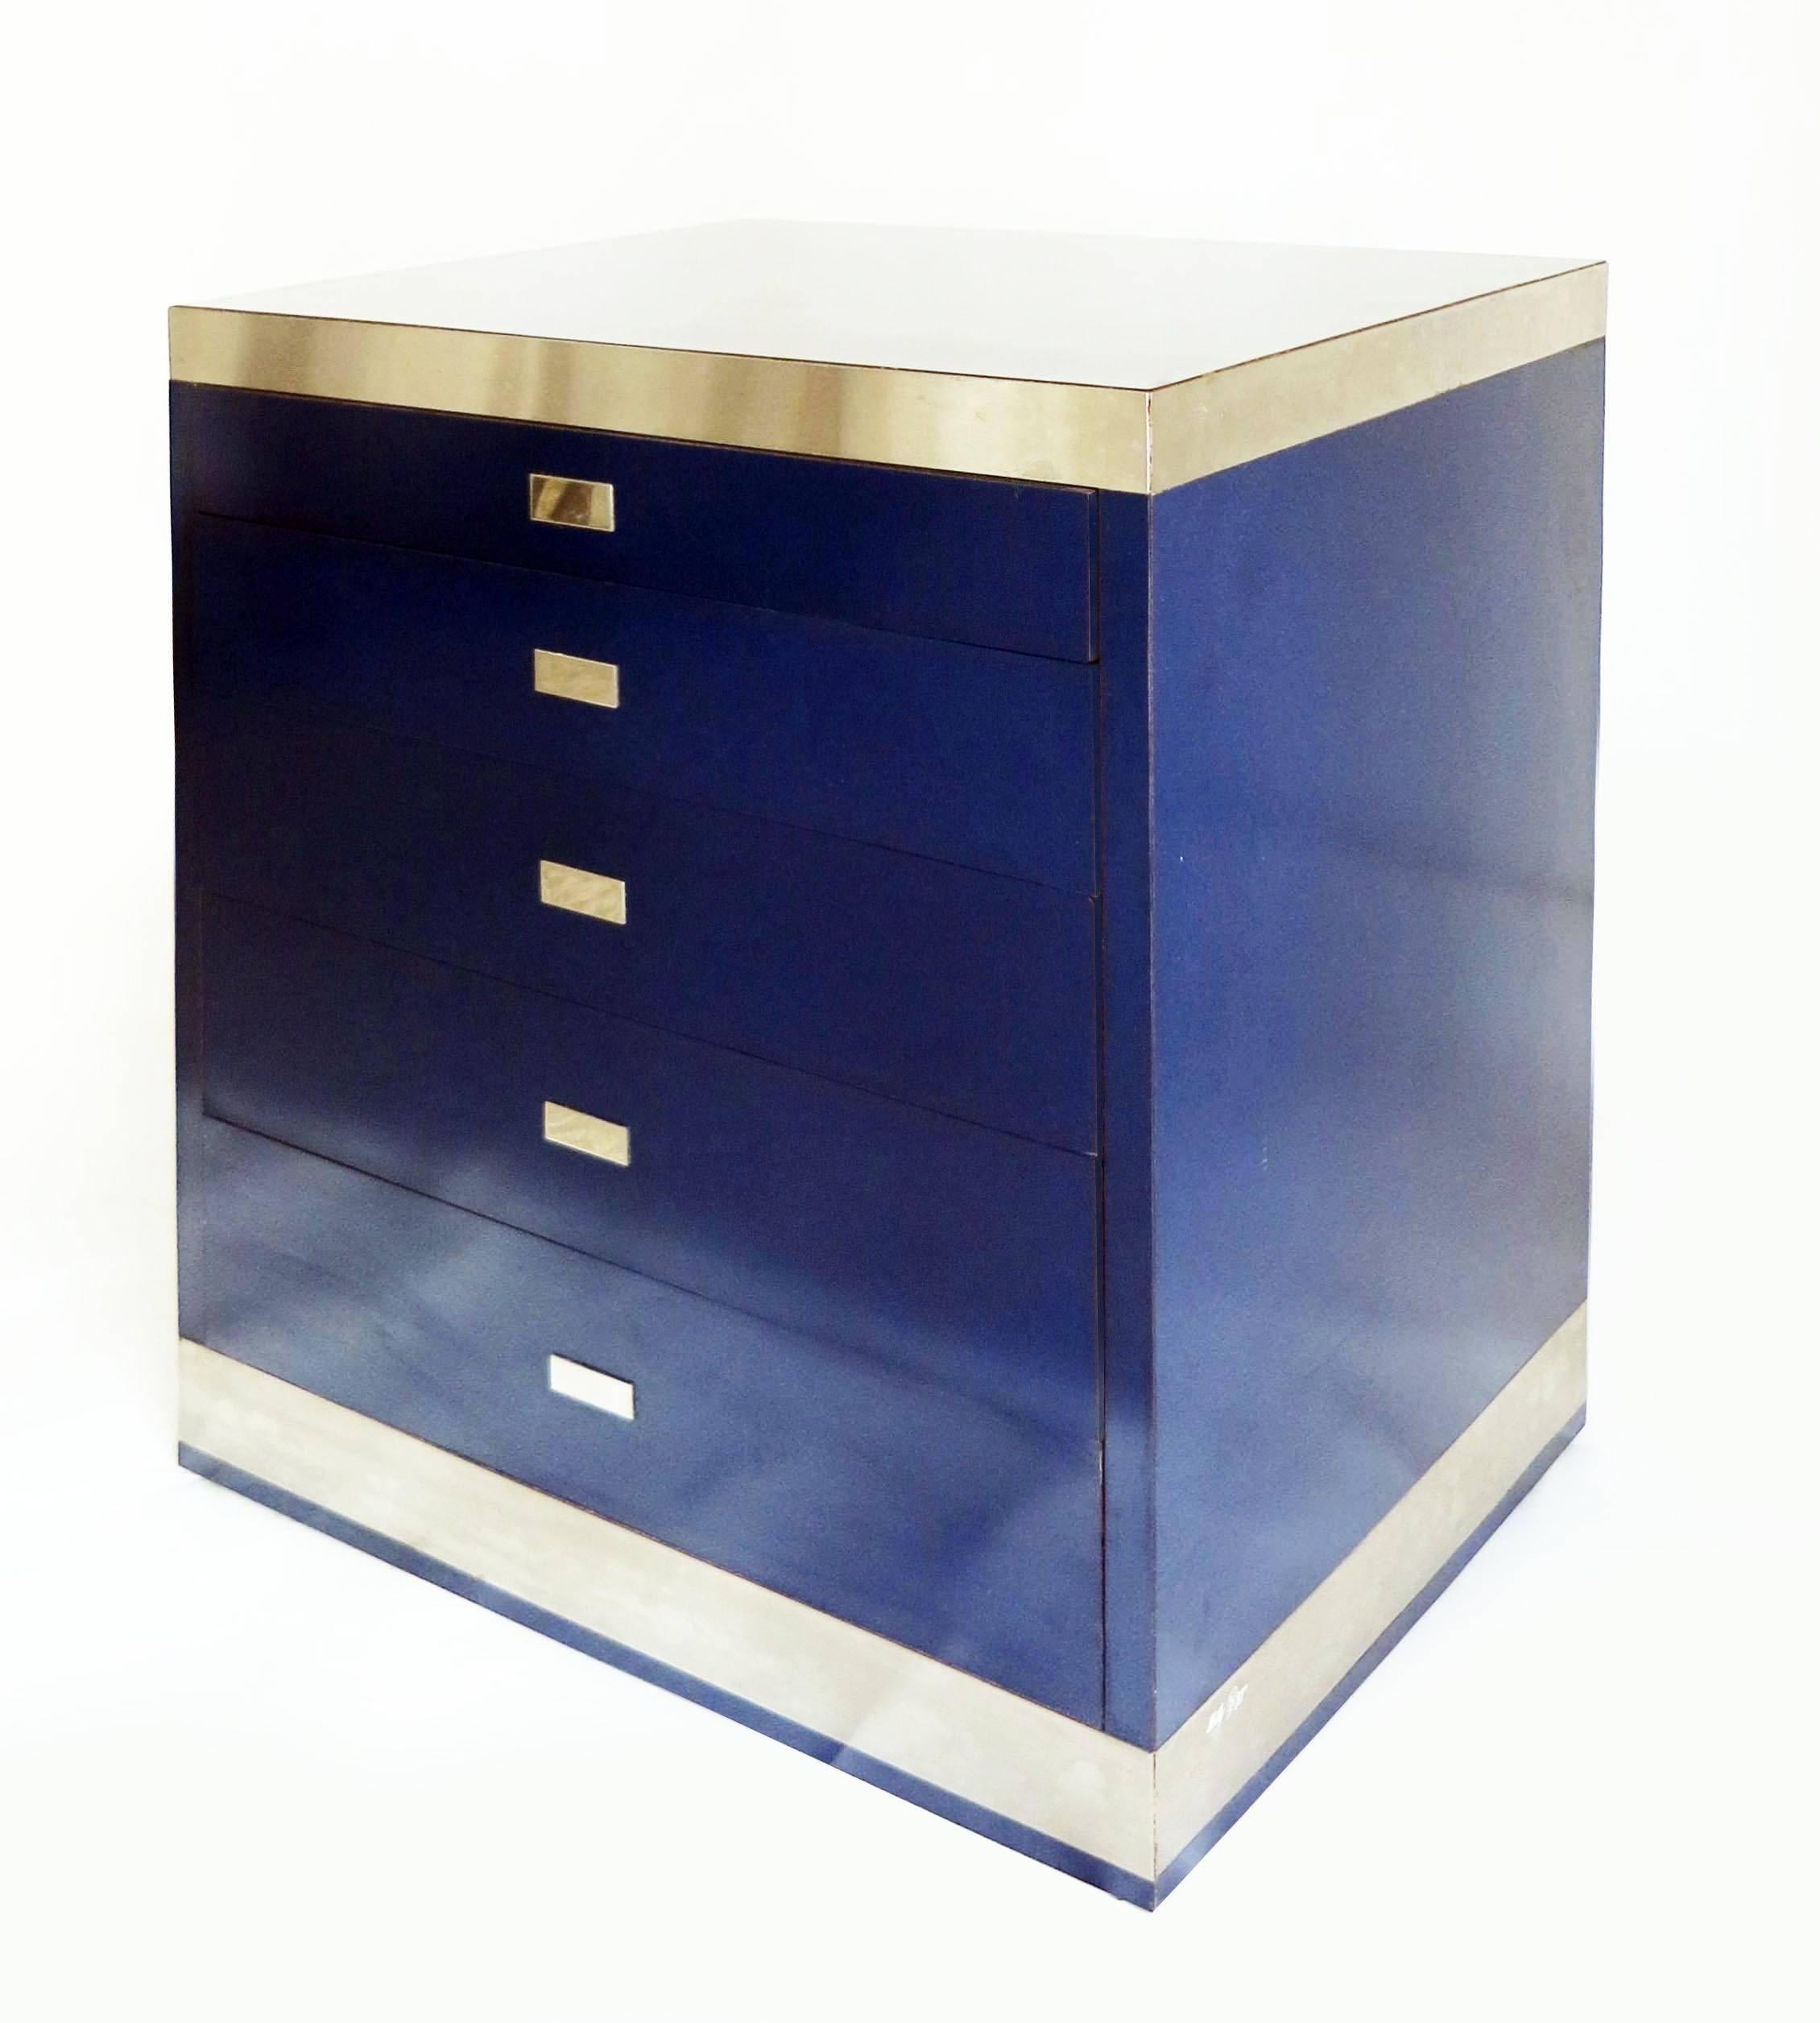 Chest of drawers by Willy Rizzo from the 1970s.
Very geometrical piece, made with beautiful dark blue laminated wood and inlaid brushed stainless steel strips.
Signed.